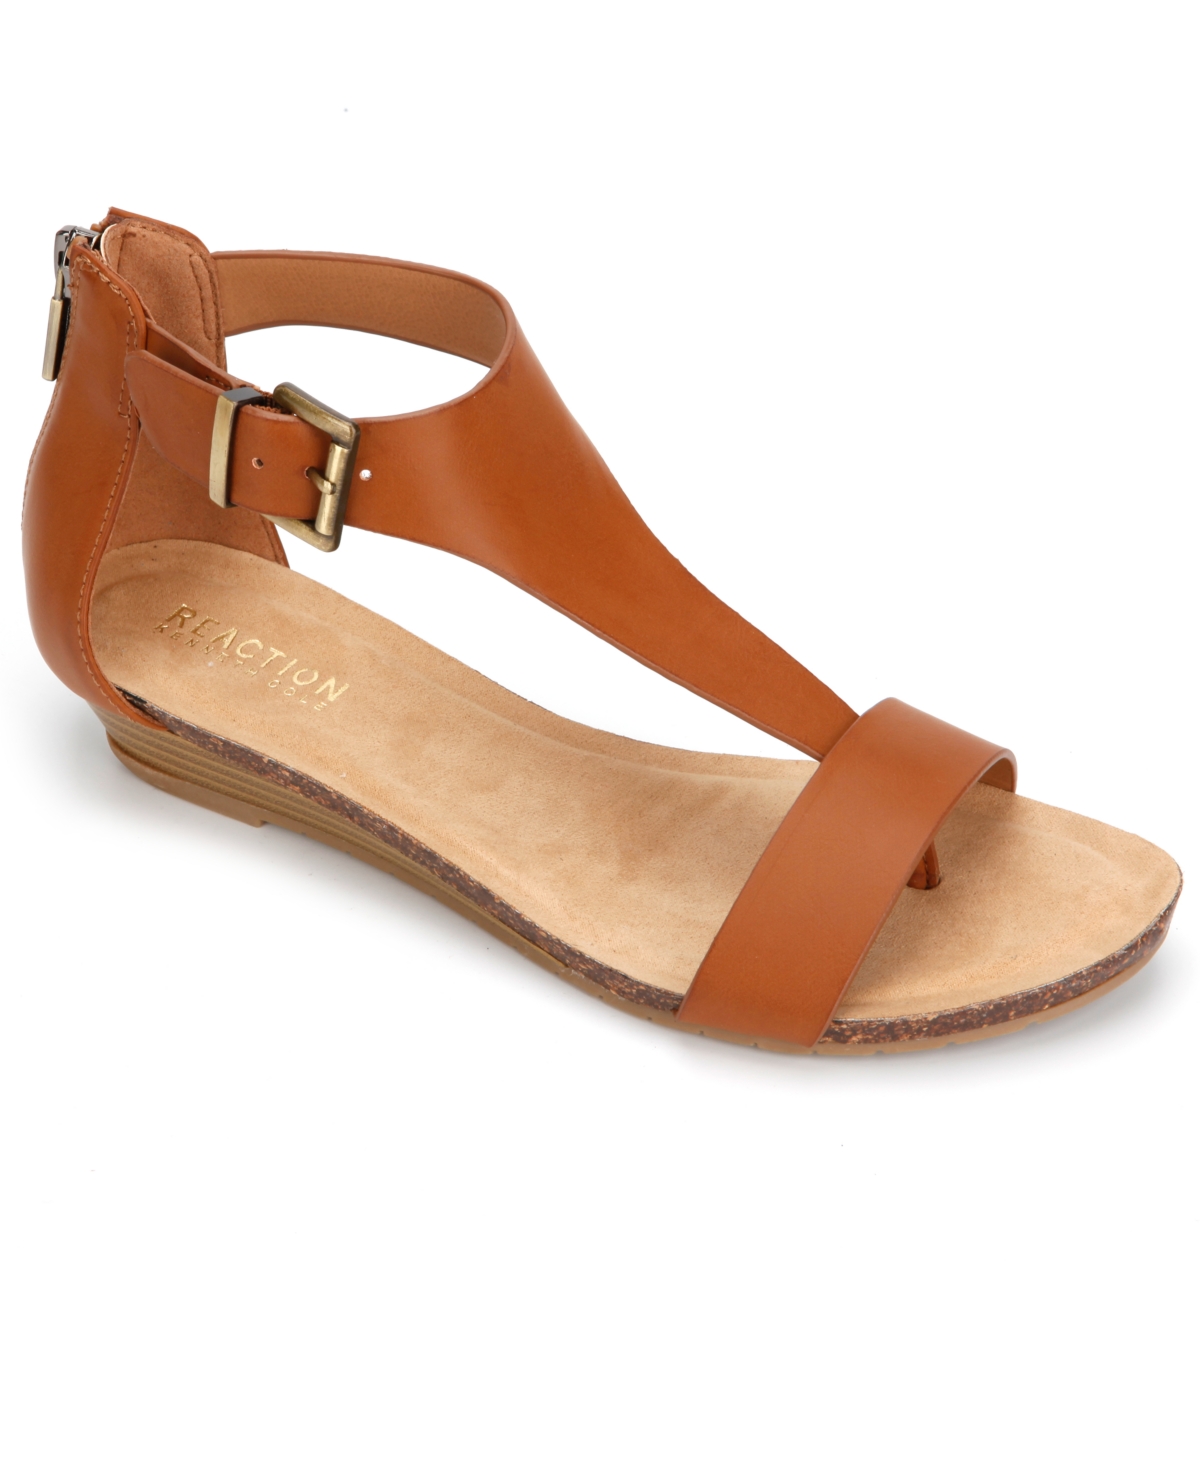 KENNETH COLE REACTION WOMEN'S GREAT GAL WEDGE SANDALS WOMEN'S SHOES